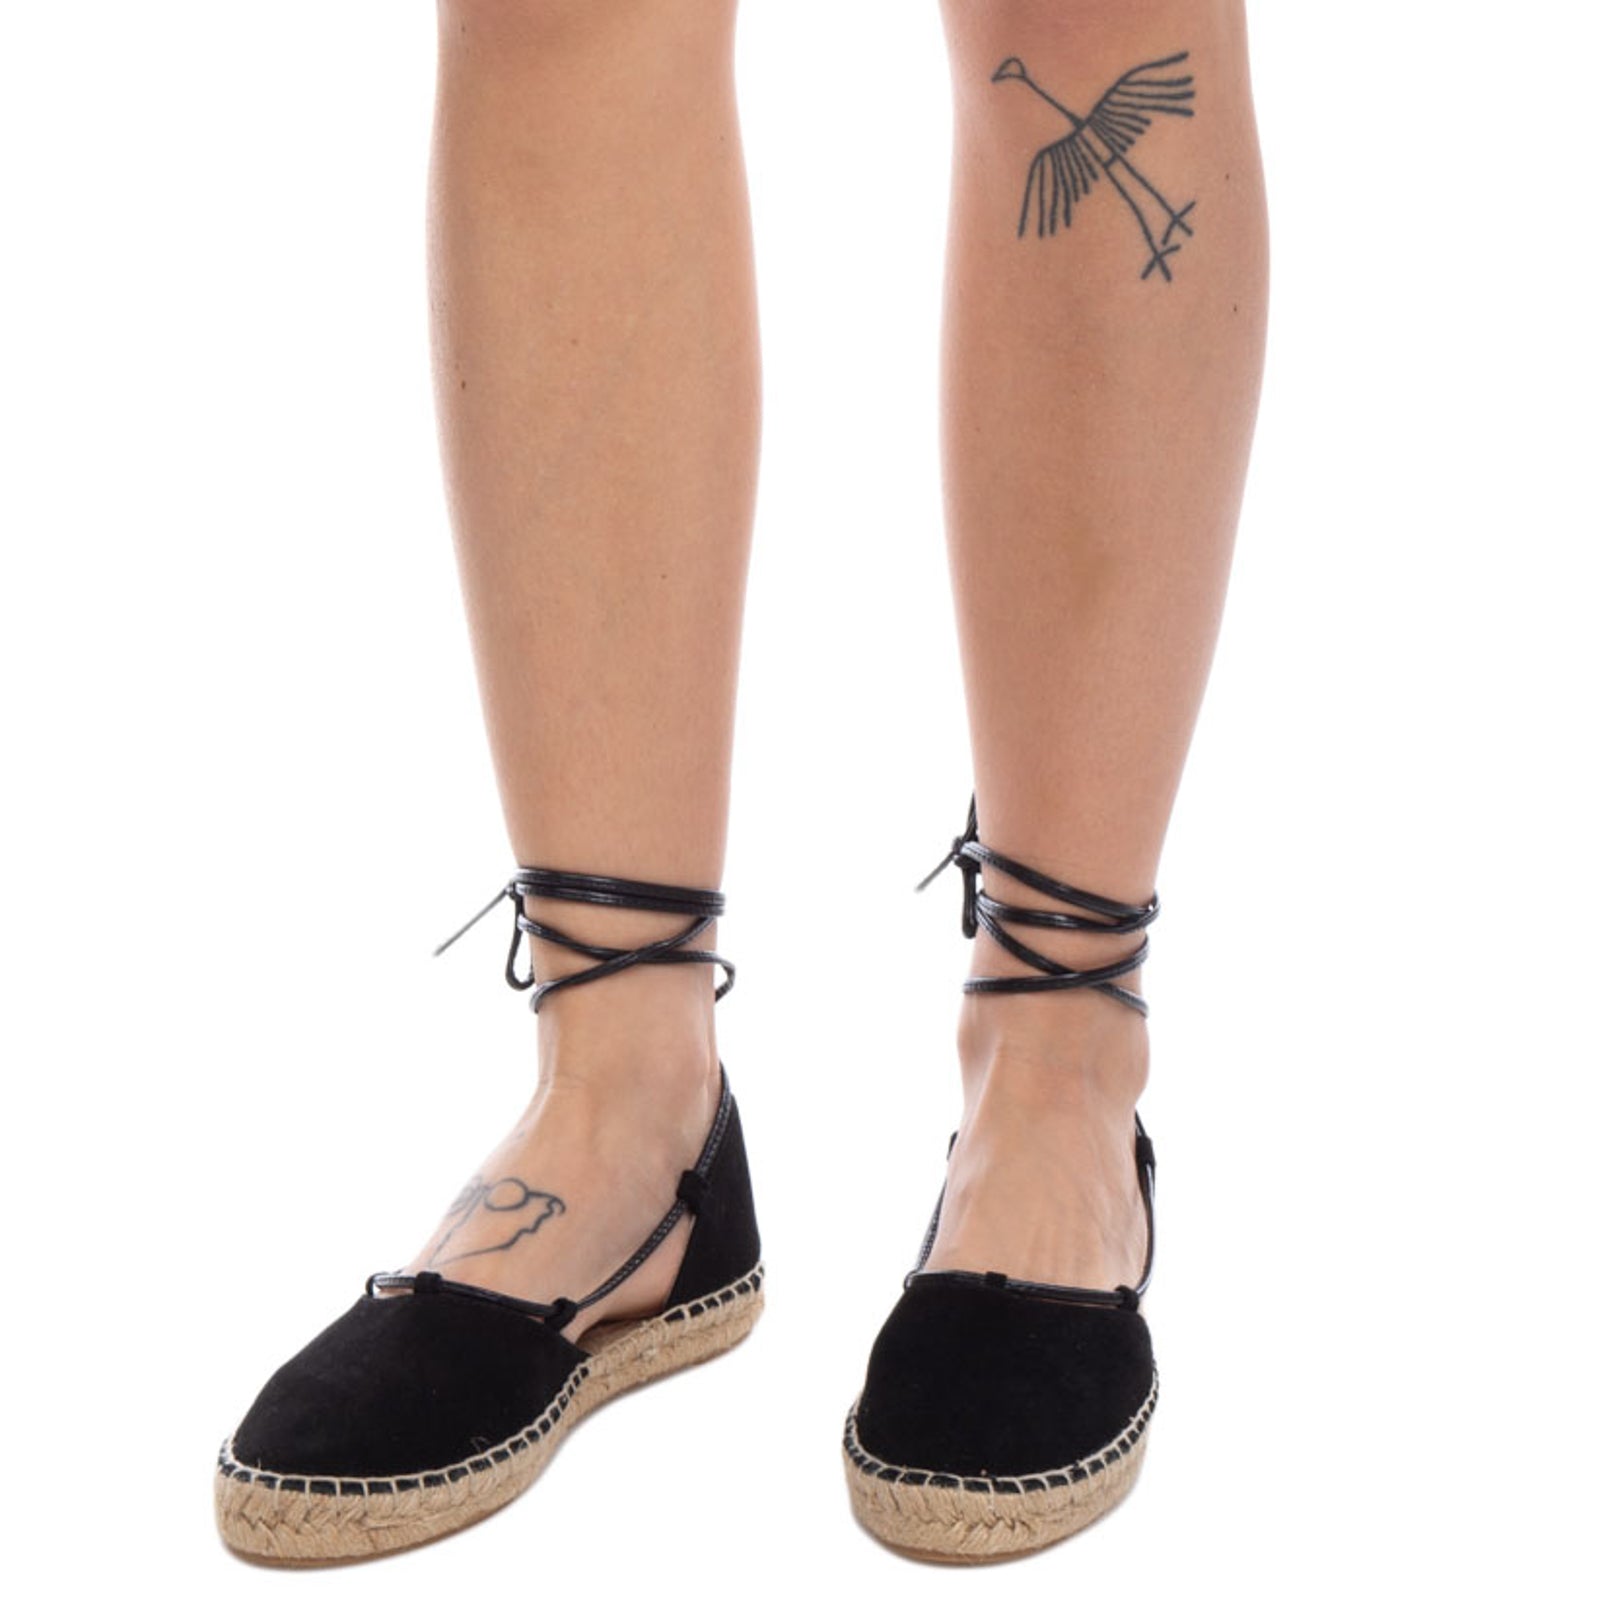 IRIS & INK Suede Leather Espadrille D'Orsay Shoes EU 36 UK 3 US 6 Wrap Around gallery main photo